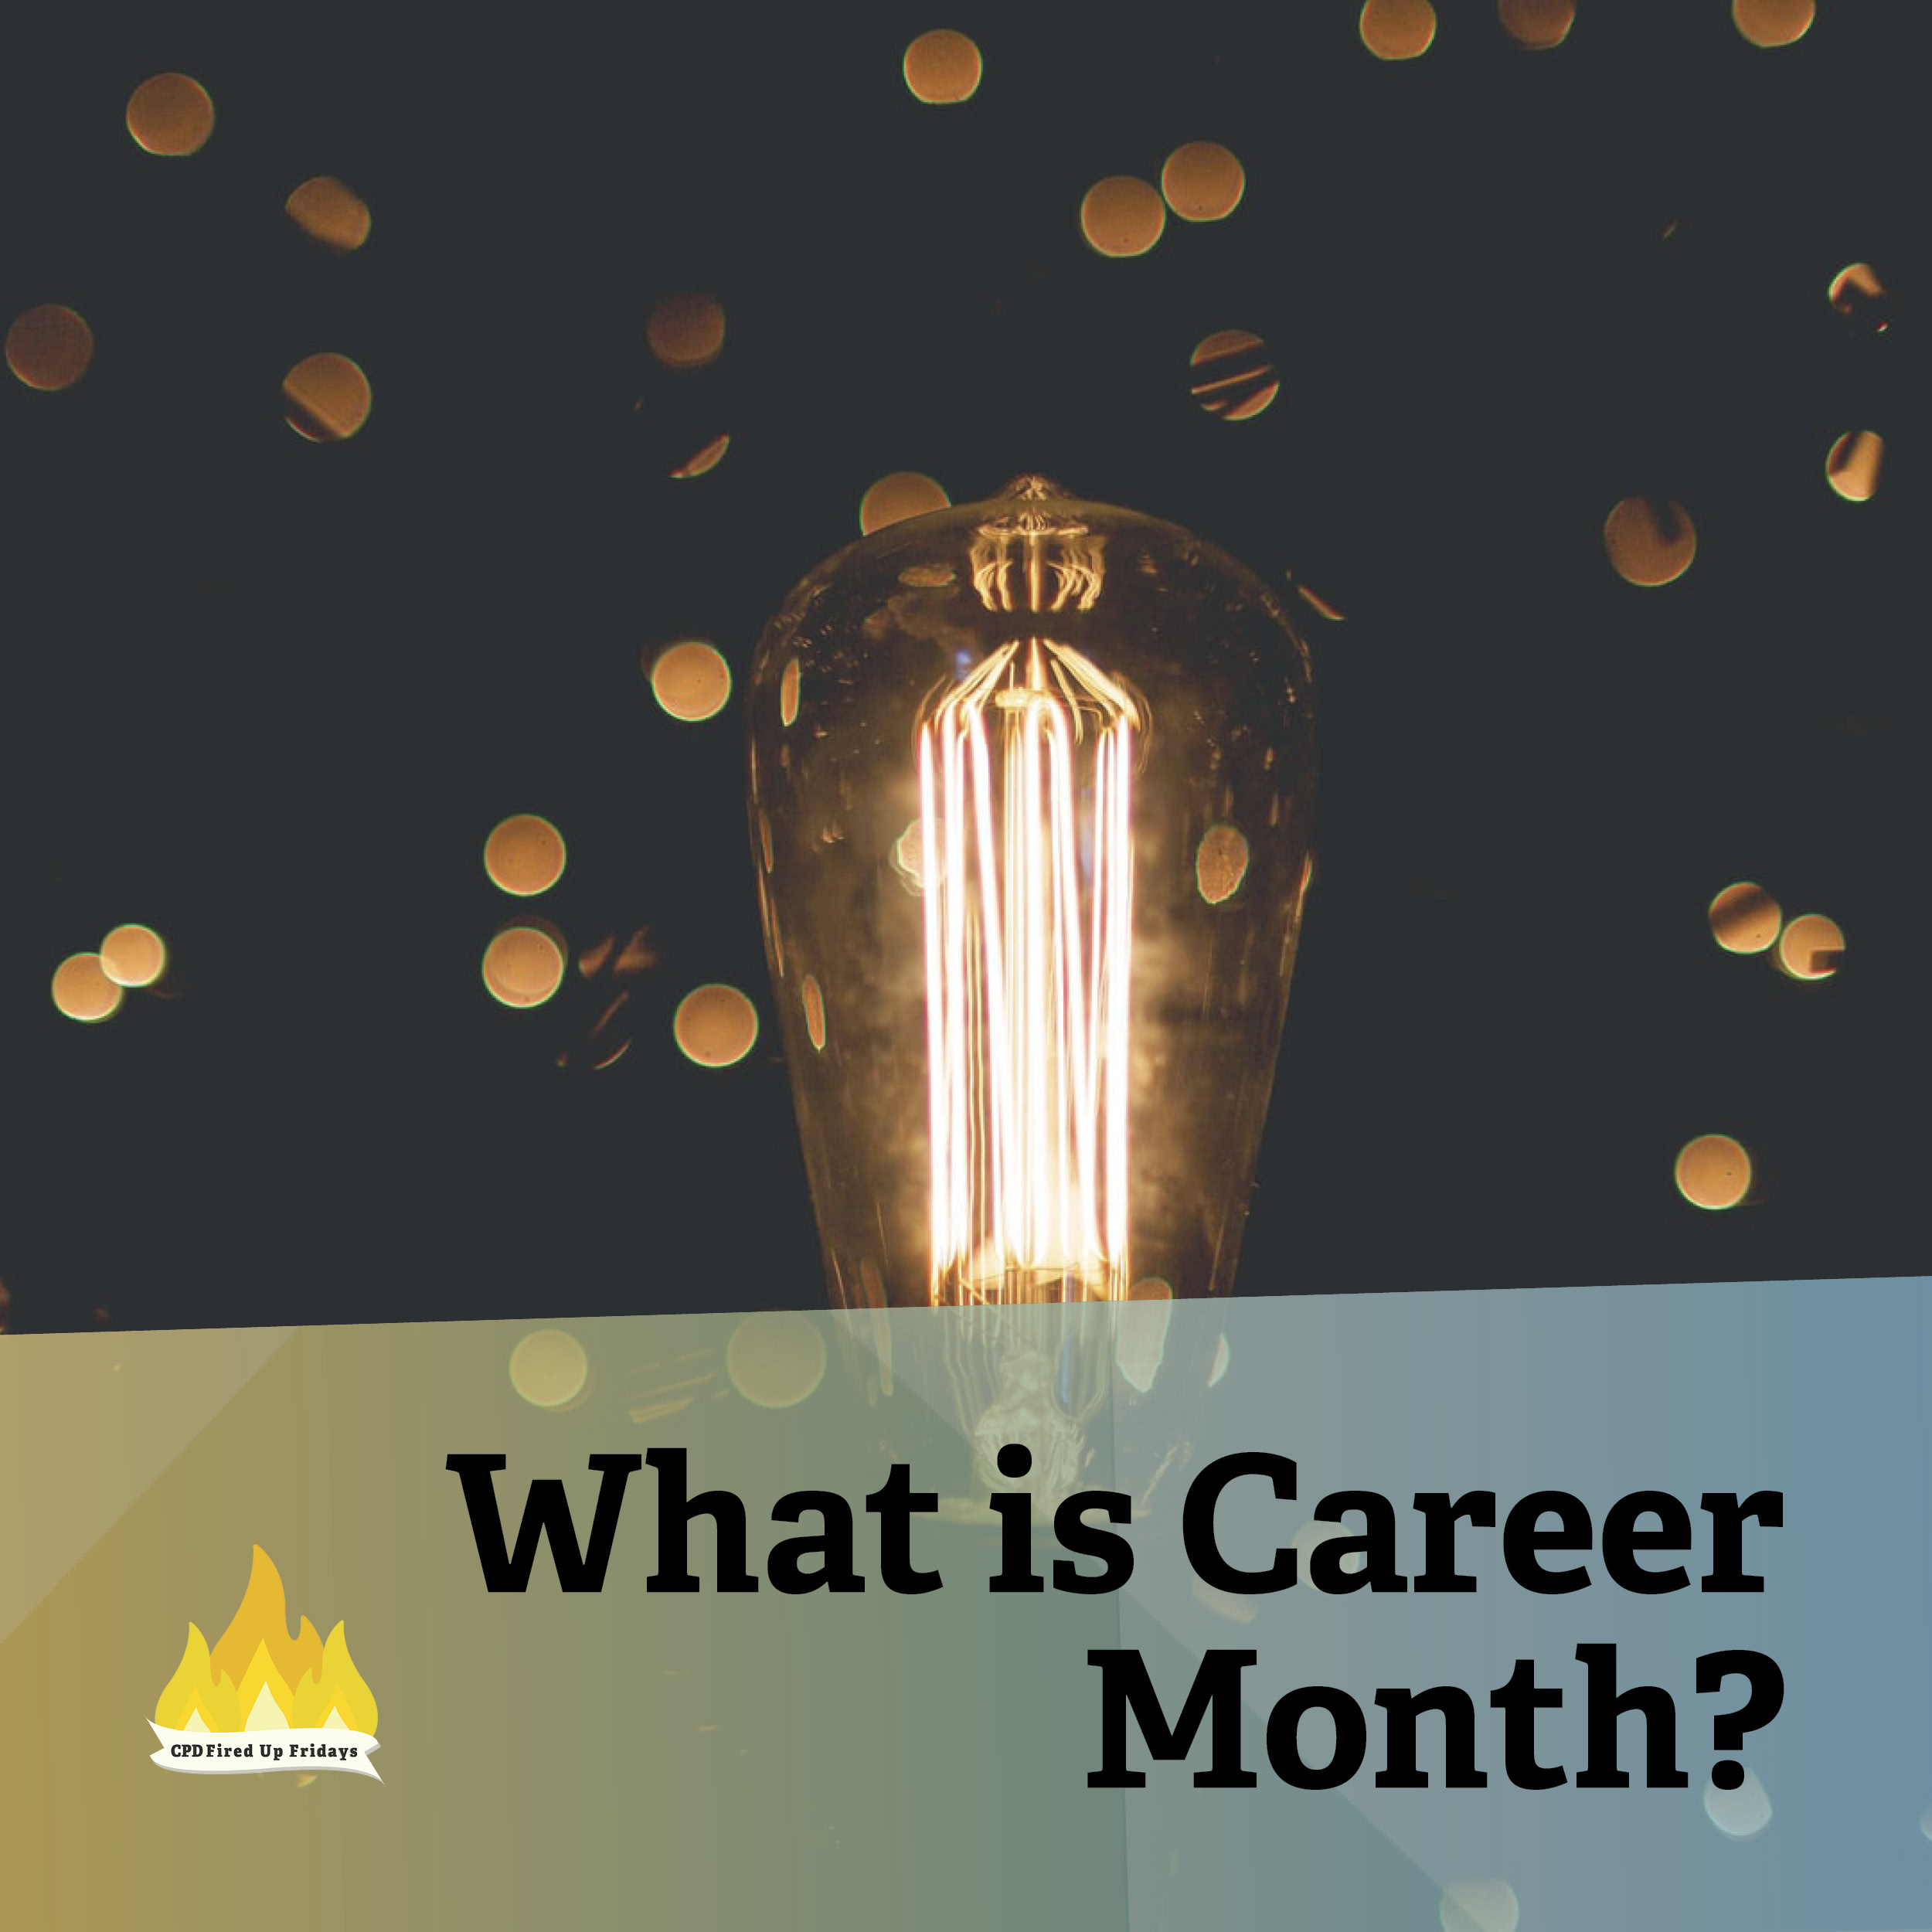 A filament bulb shines brightly in front a black background filled with soft spots of warm light. The text beneath reads: 'What is Career Month'?